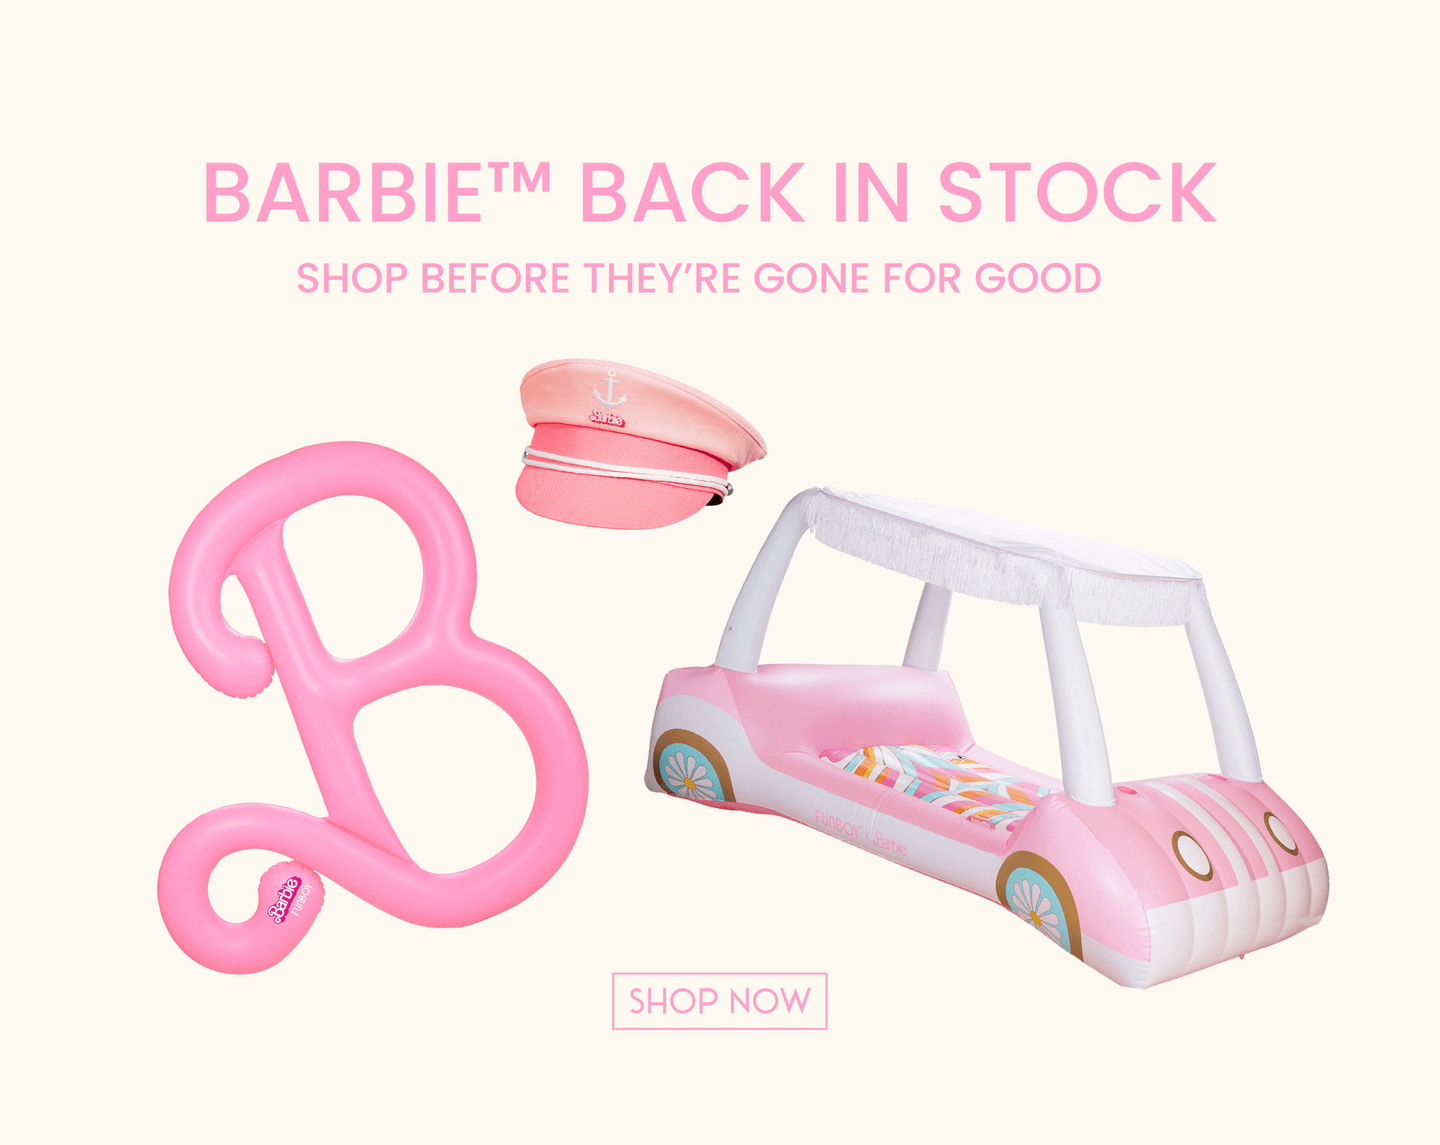 Barbie Back in Stock. Shop before they're gone for good!